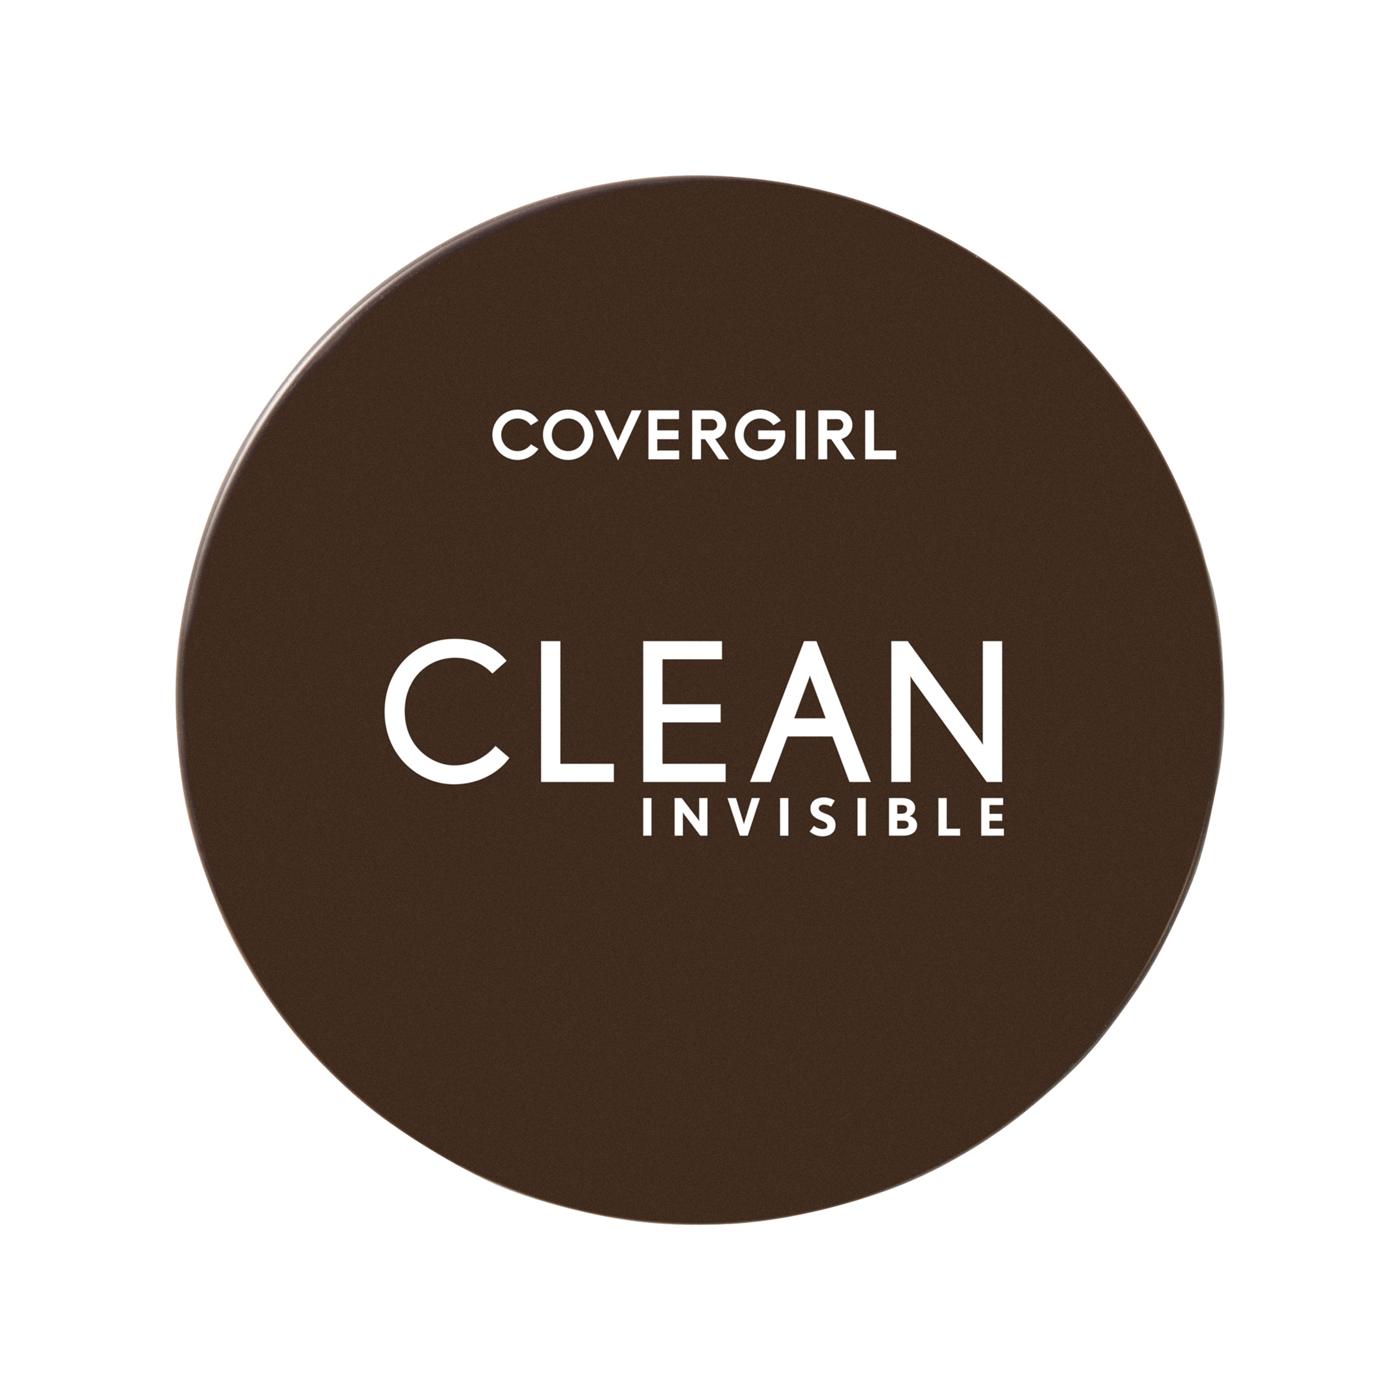 Covergirl Clean Invisible Loose Powder - Translucent Fair; image 7 of 13